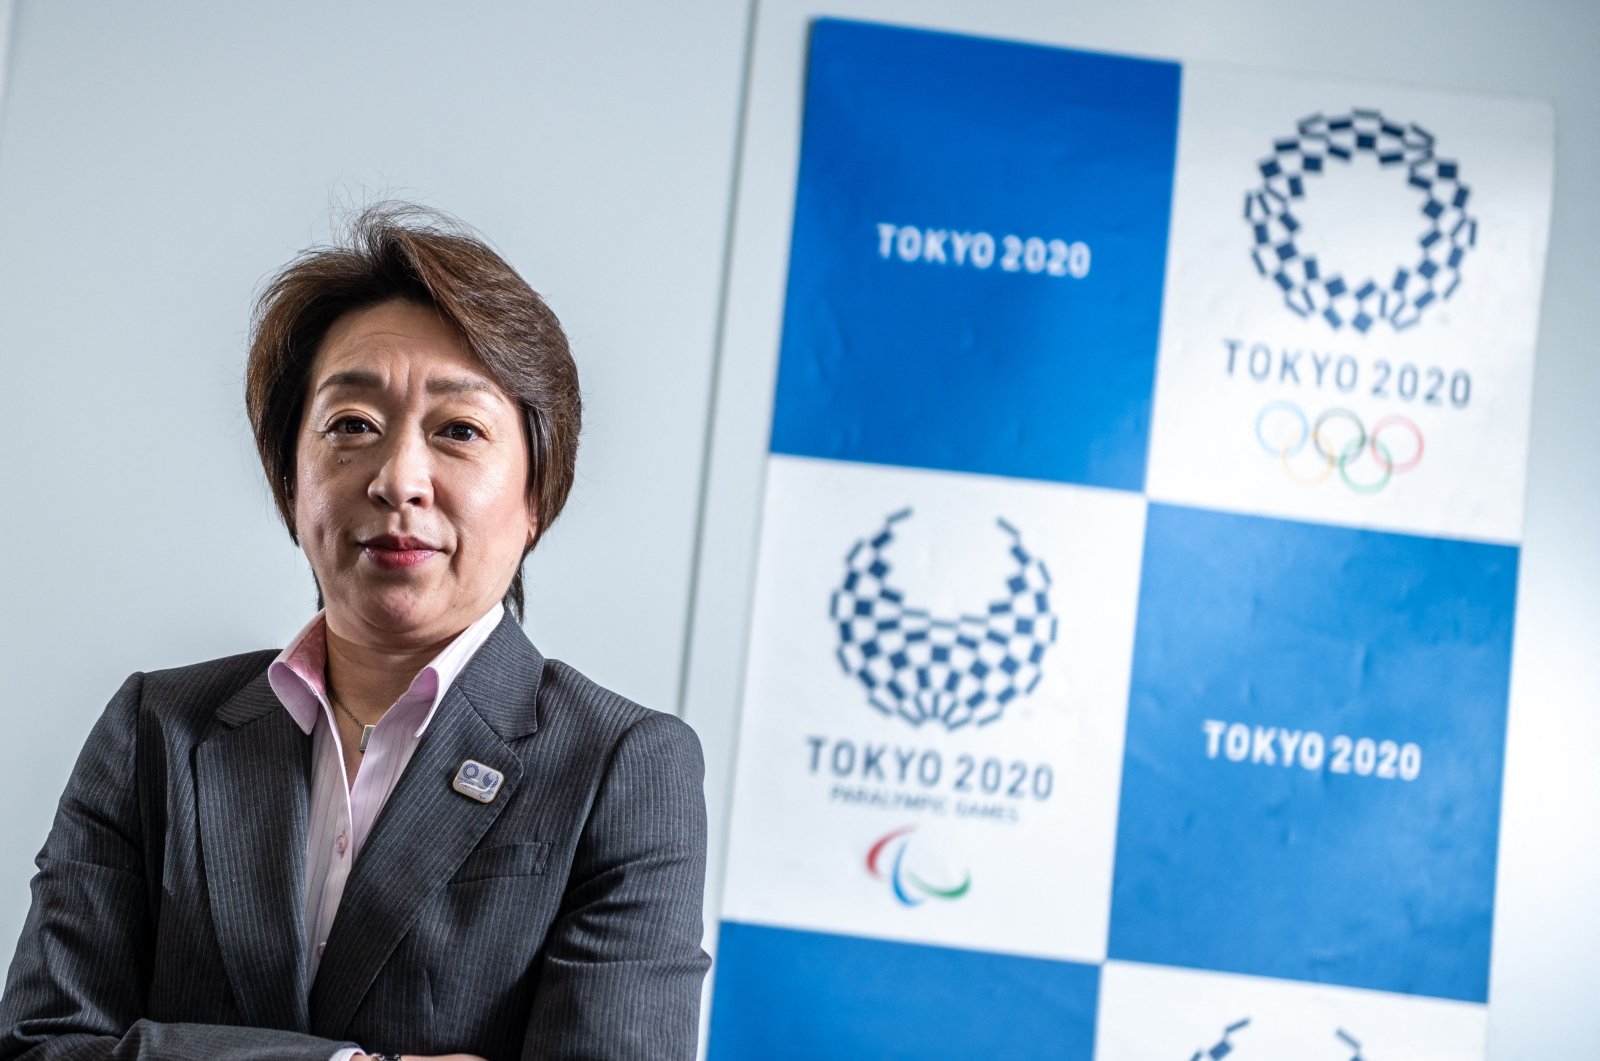 Tokyo 2020 President Seiko Hashimoto poses for a photograph before an interview with Agence Fracne-Presse (AFP) in Tokyo, Japan, April 30, 2021. (AFP Photo)